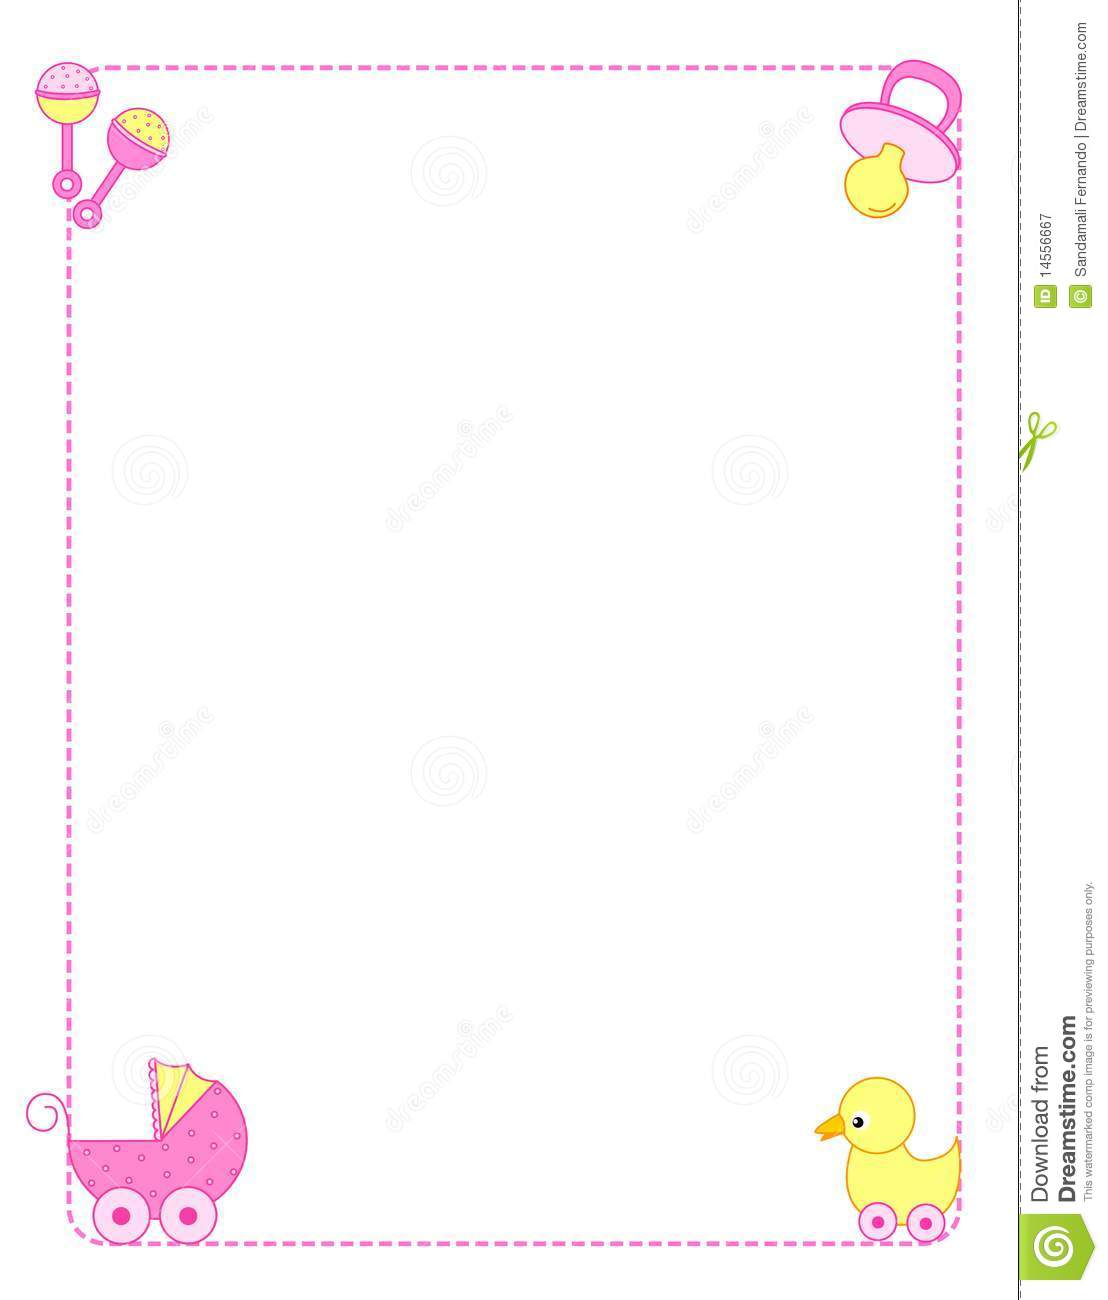 Free Baby Border Cliparts, Download Free Clip Art, Free Clip